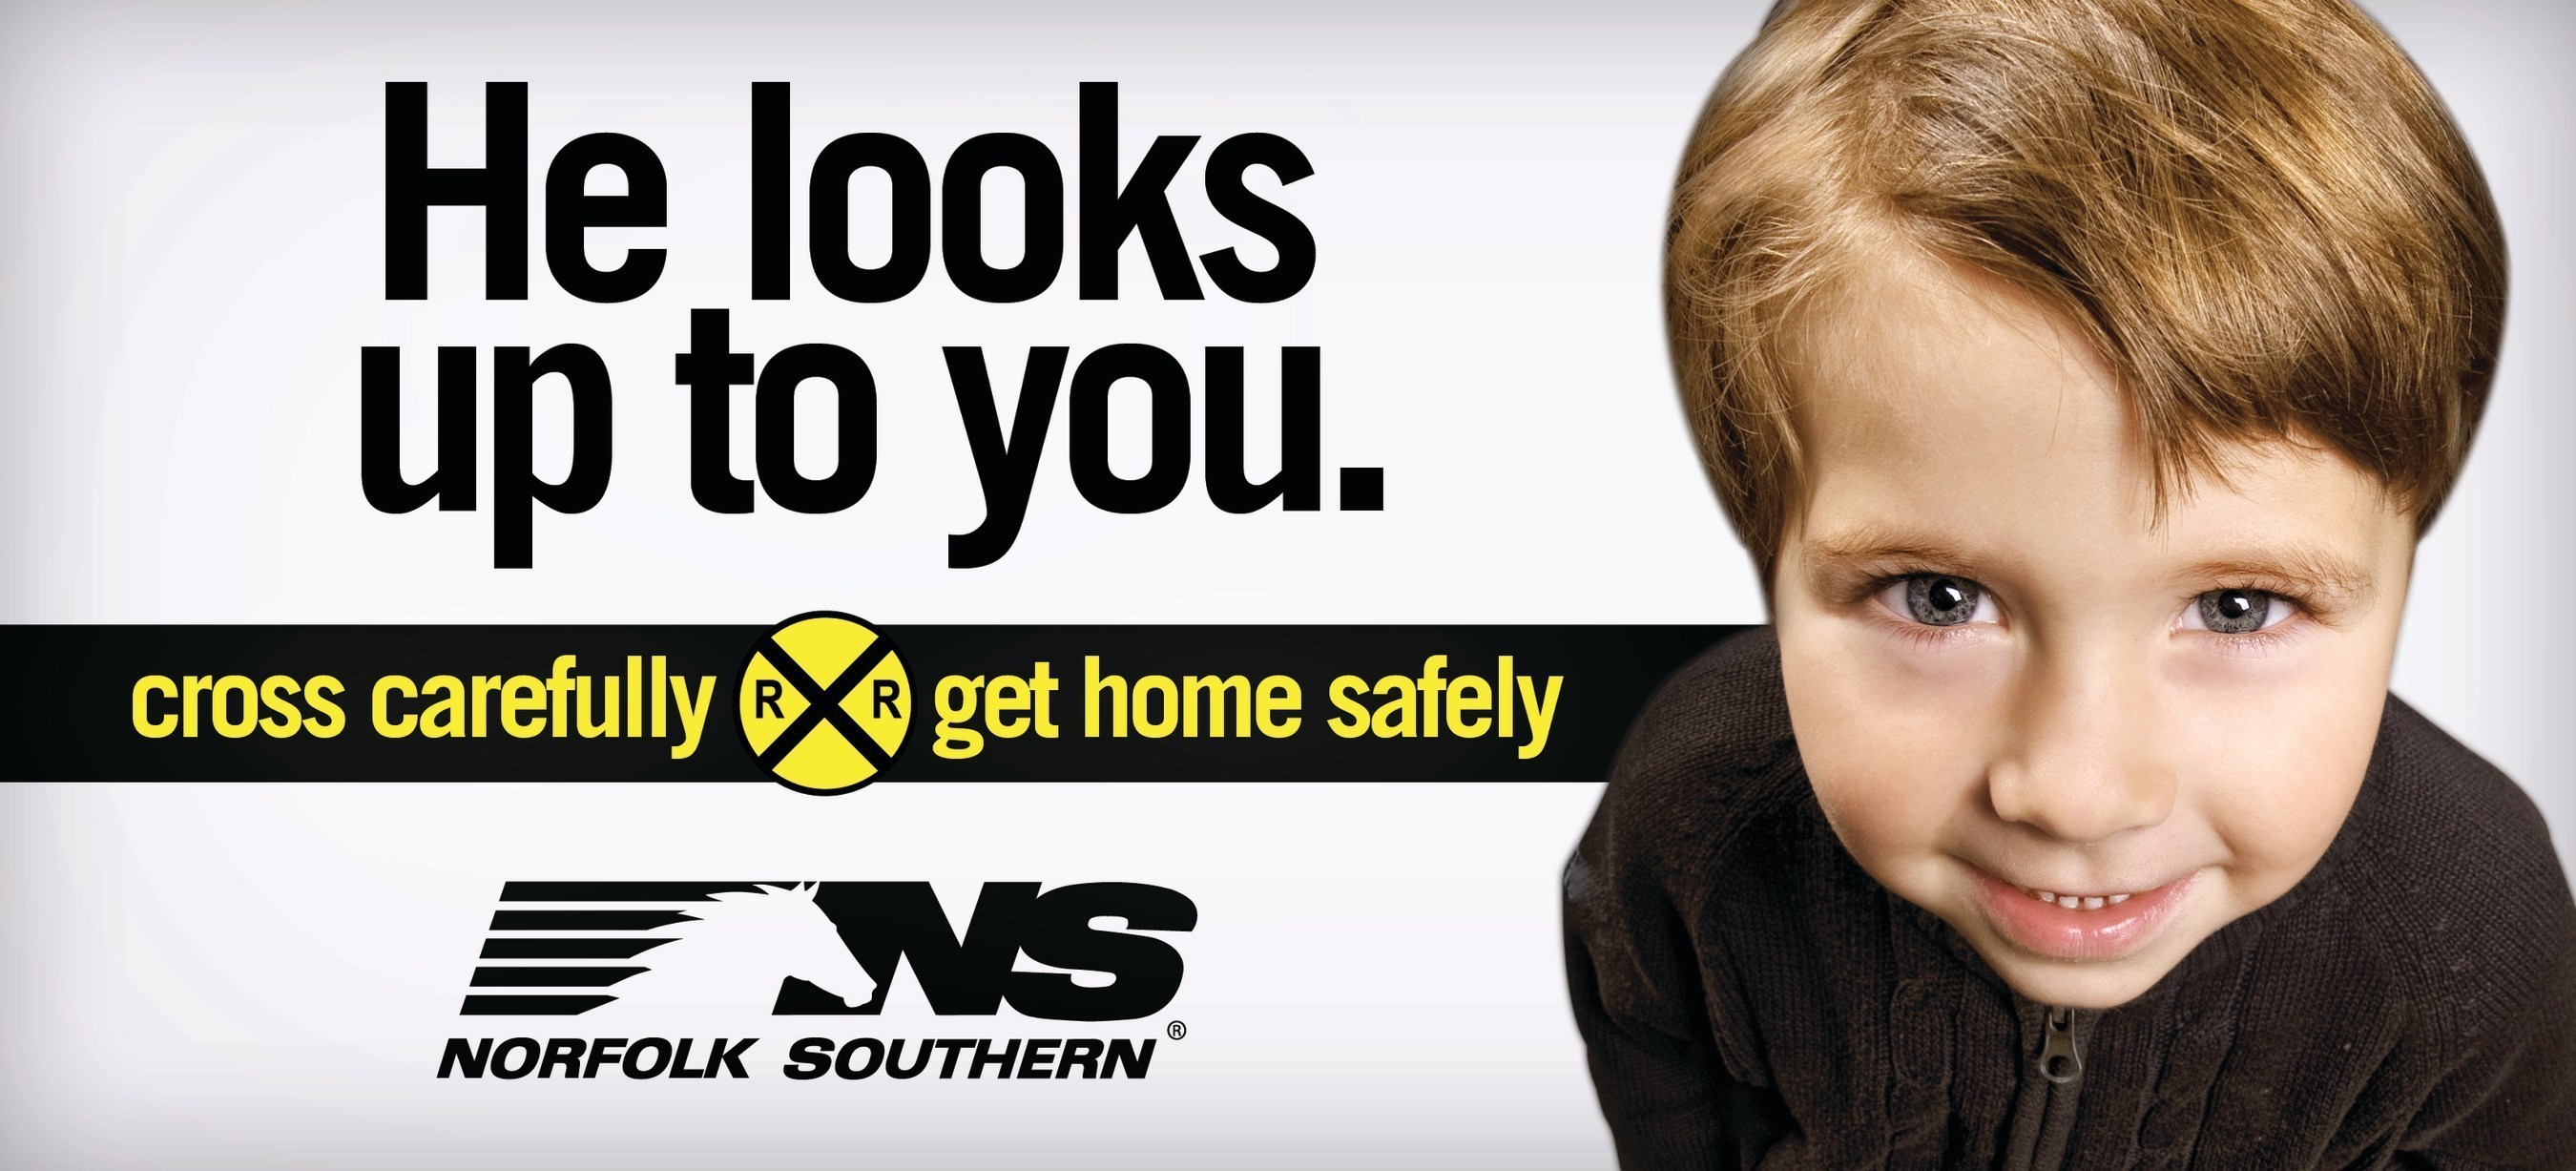 Billboards remind Indiana residents to cross railroad tracks carefully and return home safely.